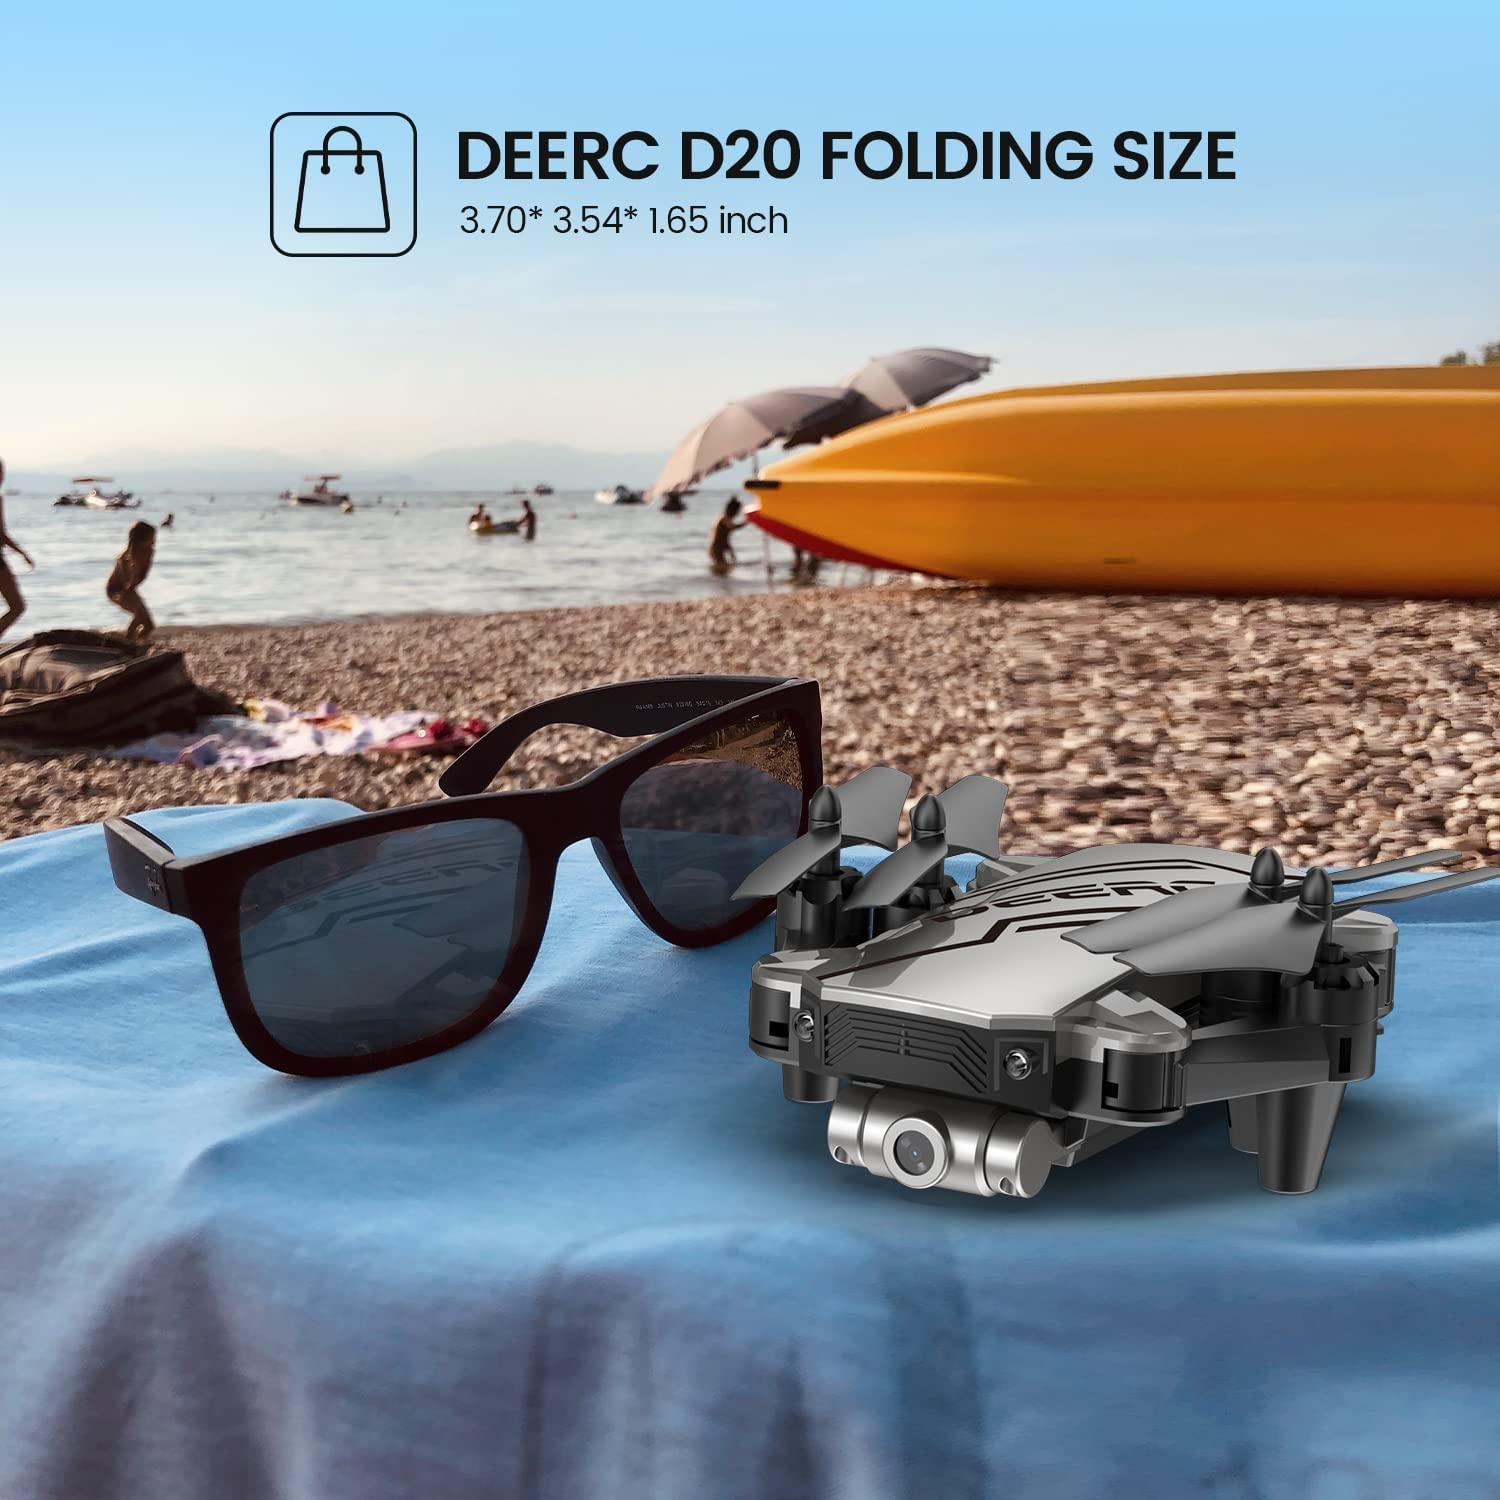 DEERC D20 Mini Drone - for Kids with 720P HD FPV Camera Remote Control Toys Gifts for Boys Girls with Altitude Hold, Headless Mode, One Key Start Speed Adjustment, 3D Flips 2 Batteries - RCDrone